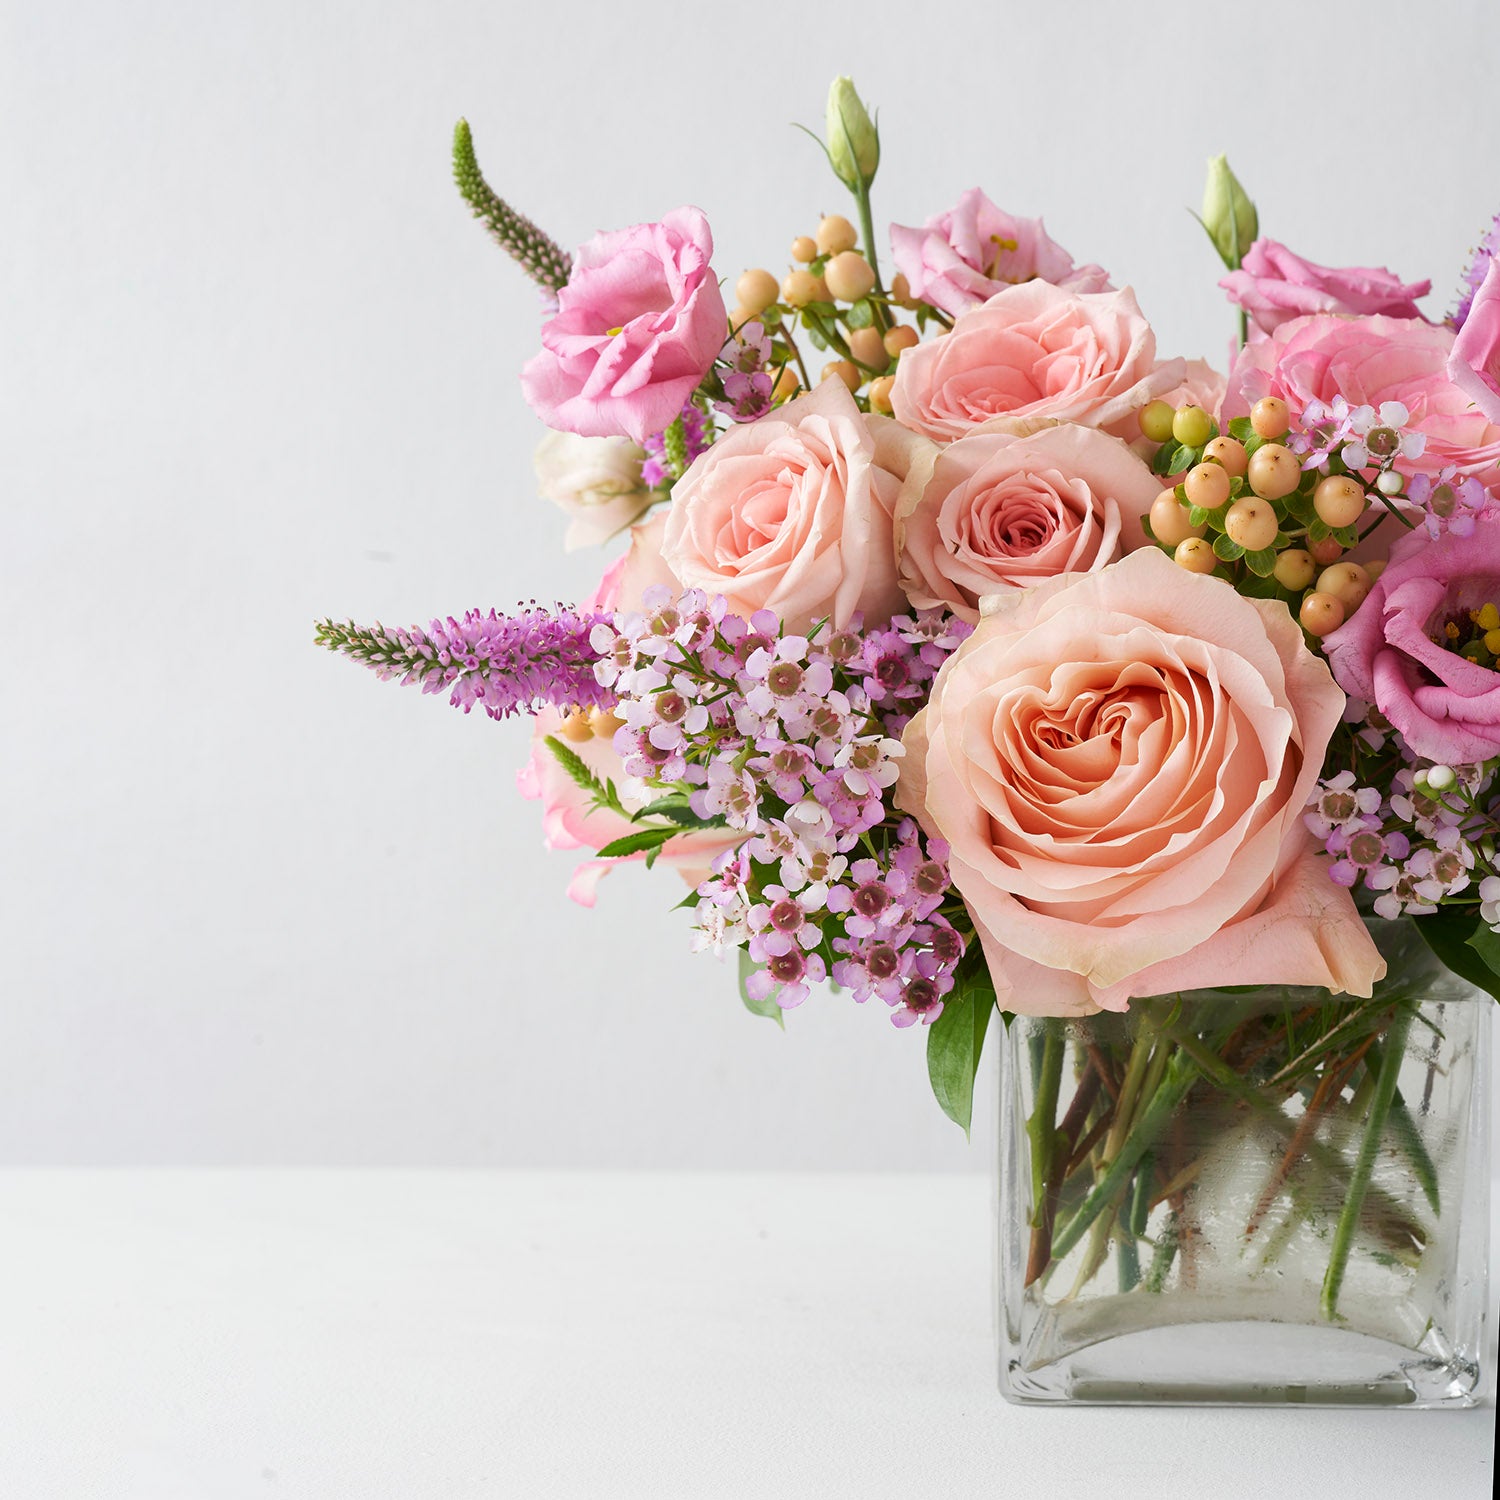 Arrangement of soft peachy roses, pink wax flower, pink lisianthus and pink veronica in glass vase on white background.